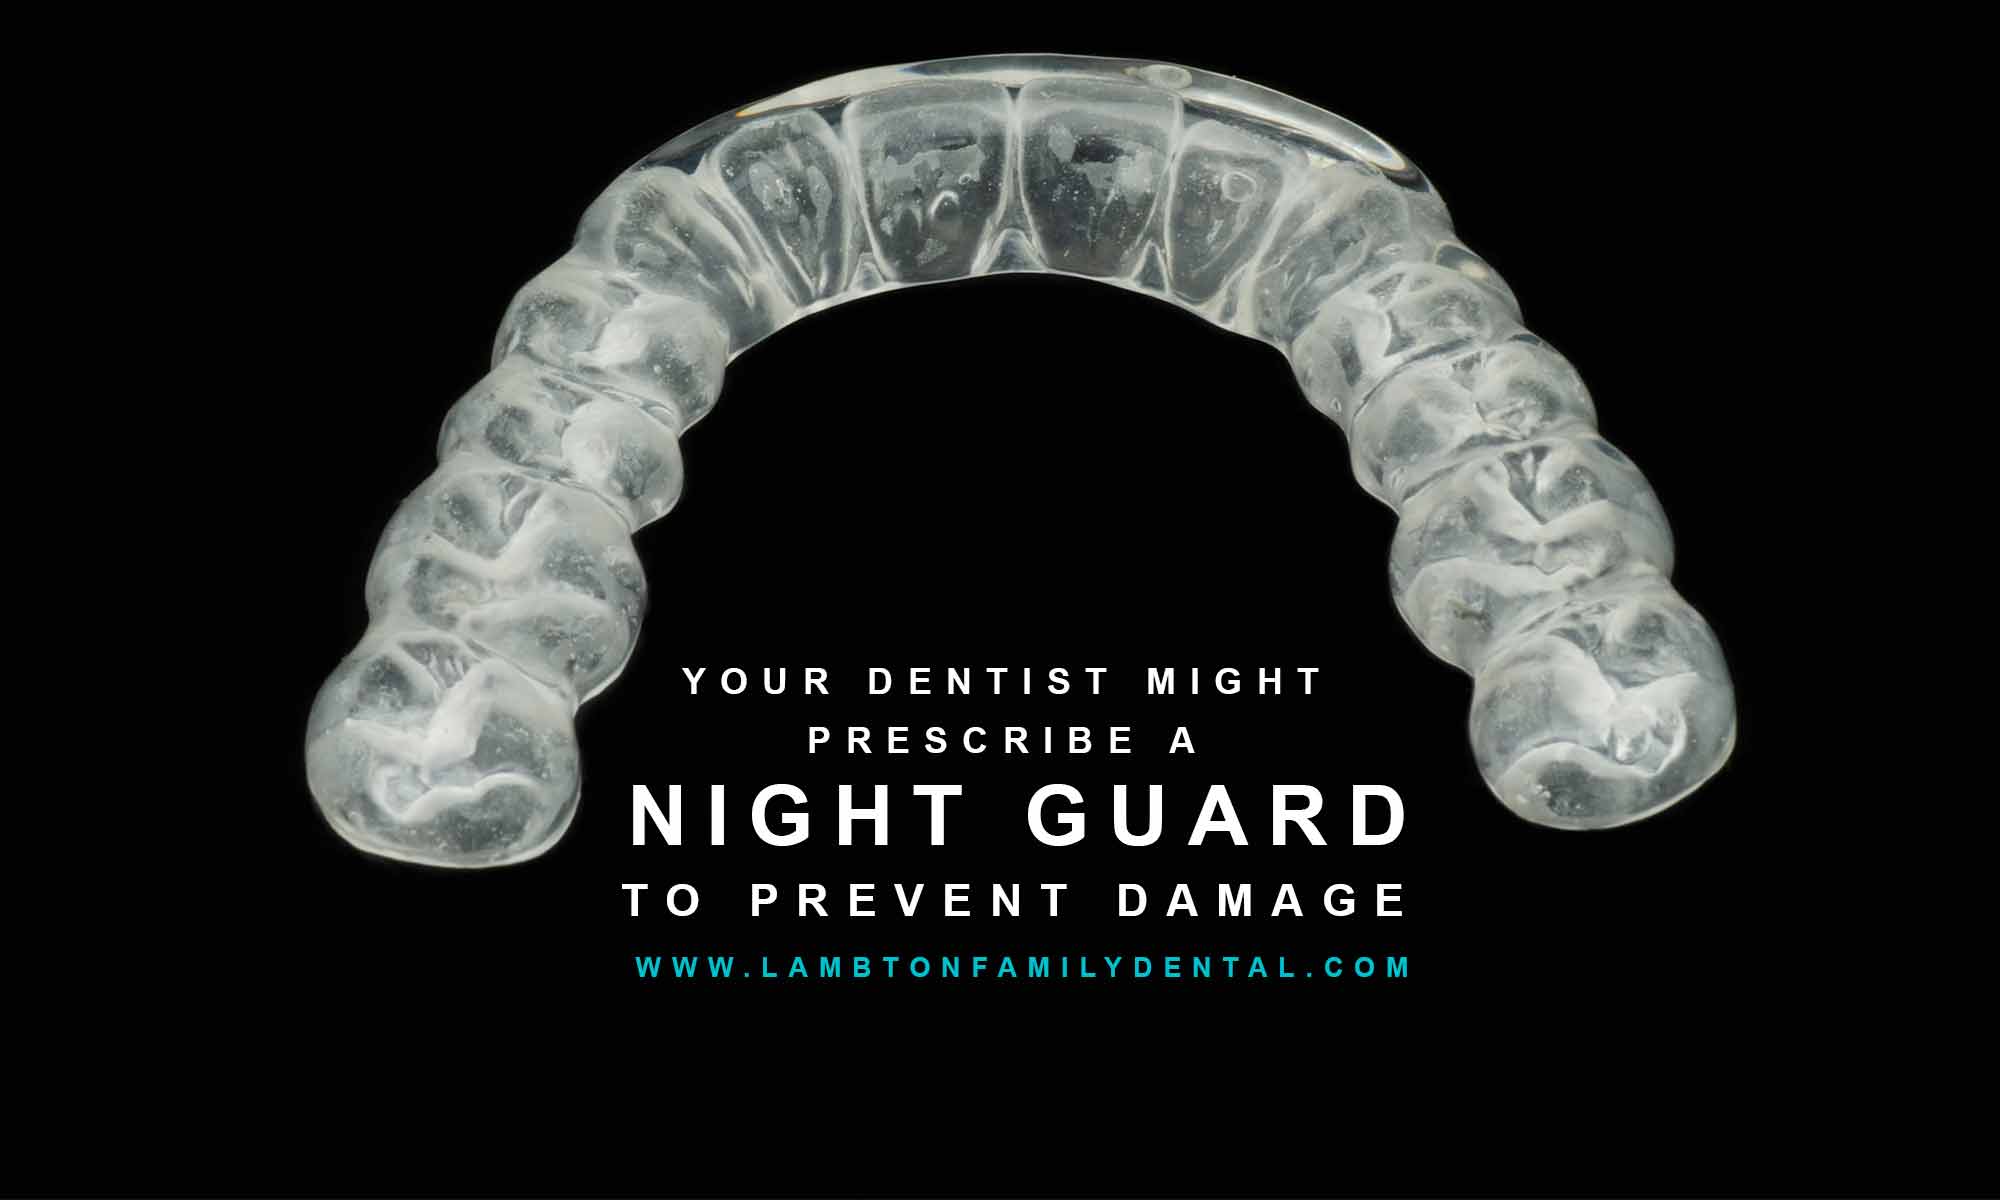 he Nightly Grind: Teeth Grinding Causes, Risks, Cures for Bruxism